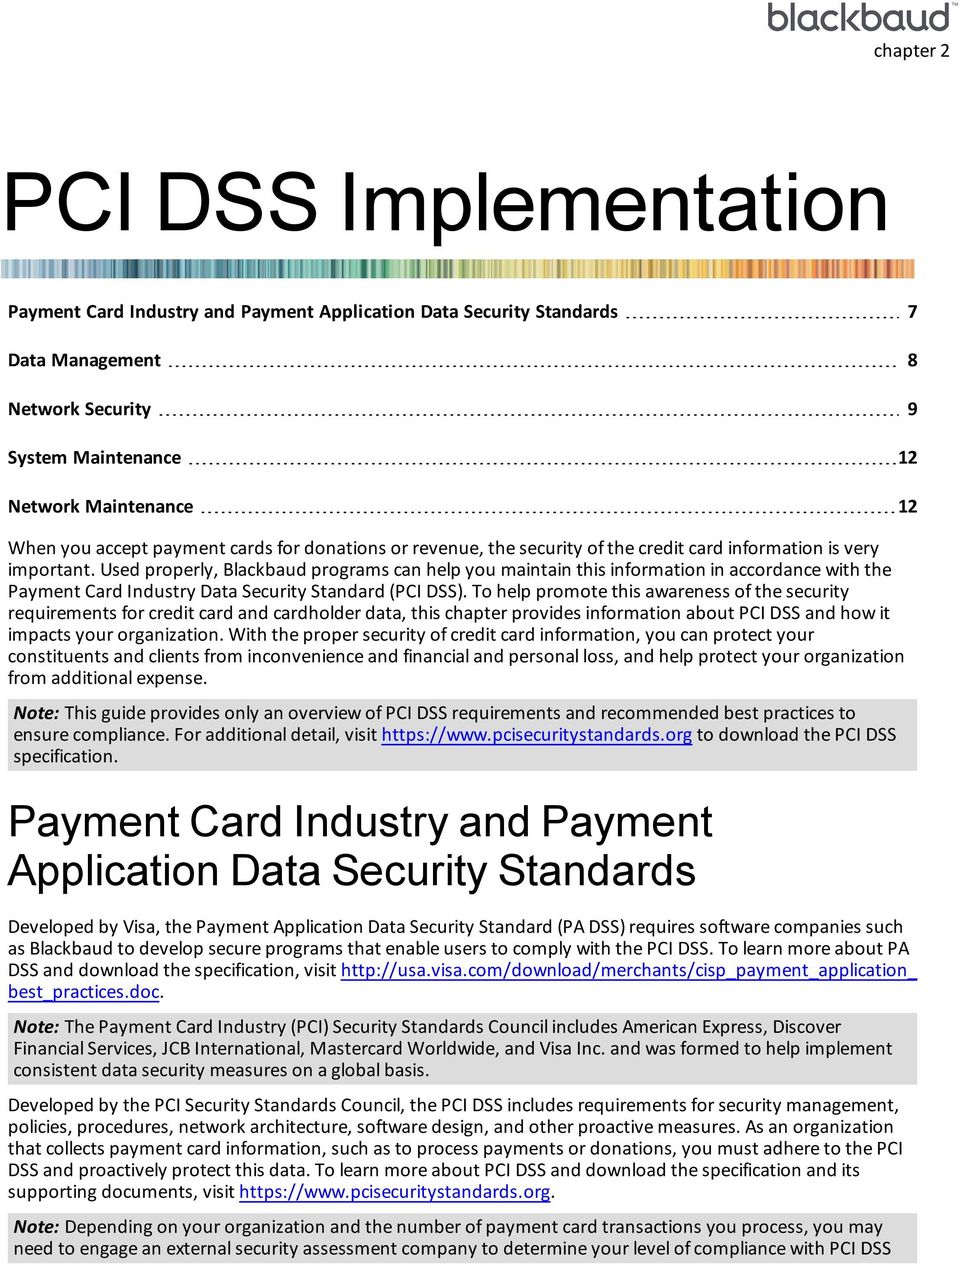 Used properly, Blackbaud programs can help you maintain this information in accordance with the Payment Card Industry Data Security Standard (PCI DSS).